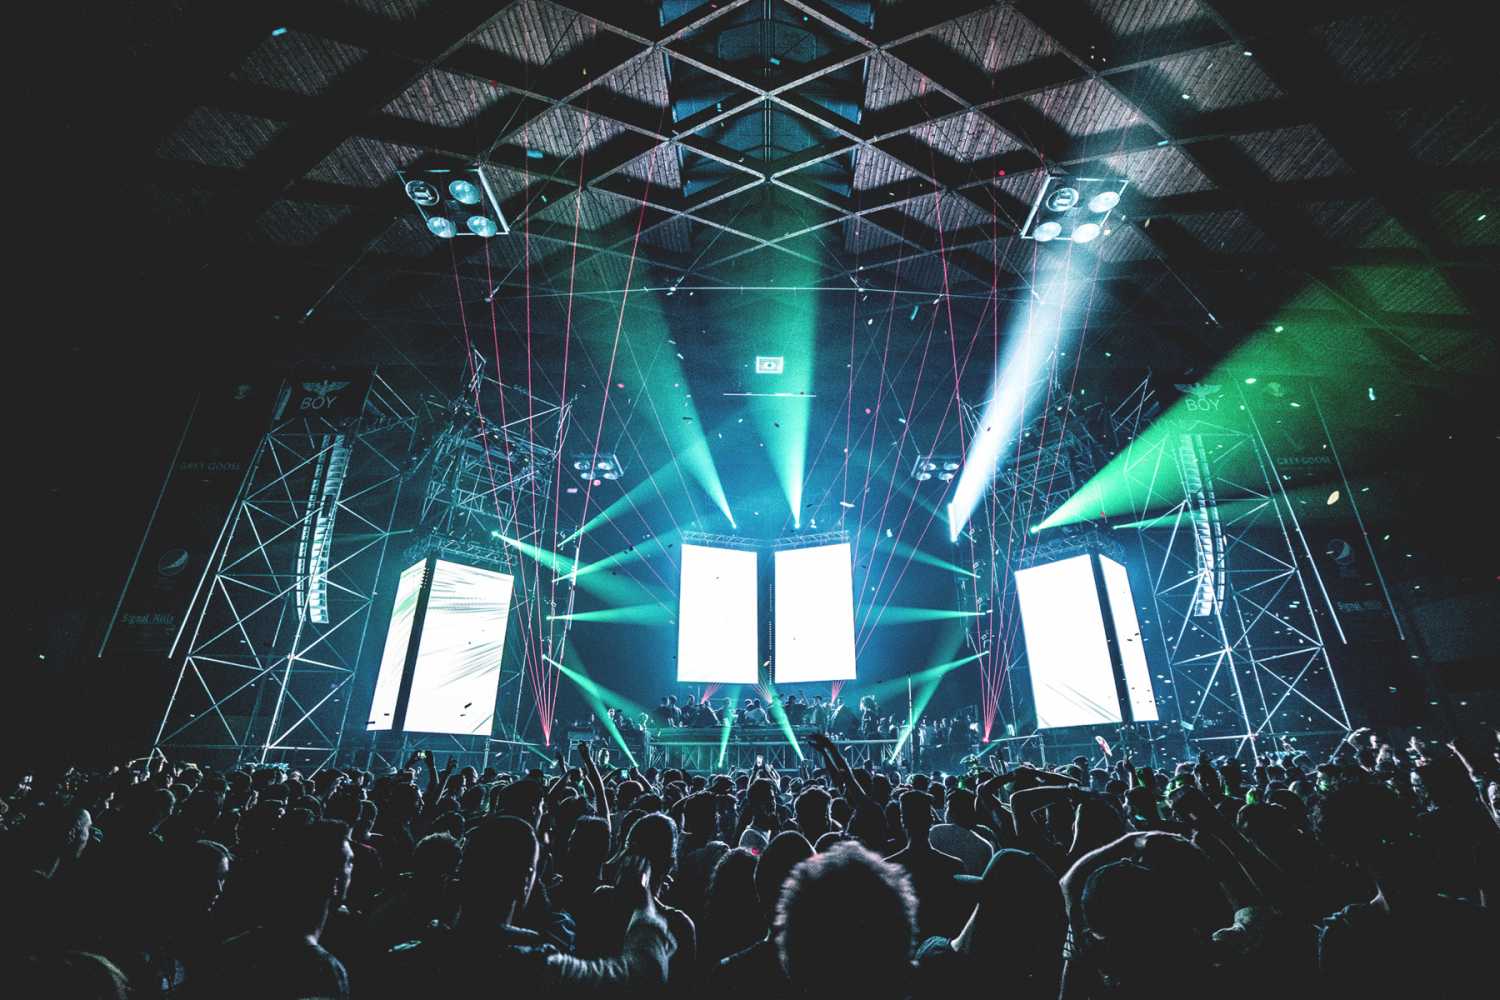 The Music Inside Festival (MIF) featured an all-star line-up of DJs